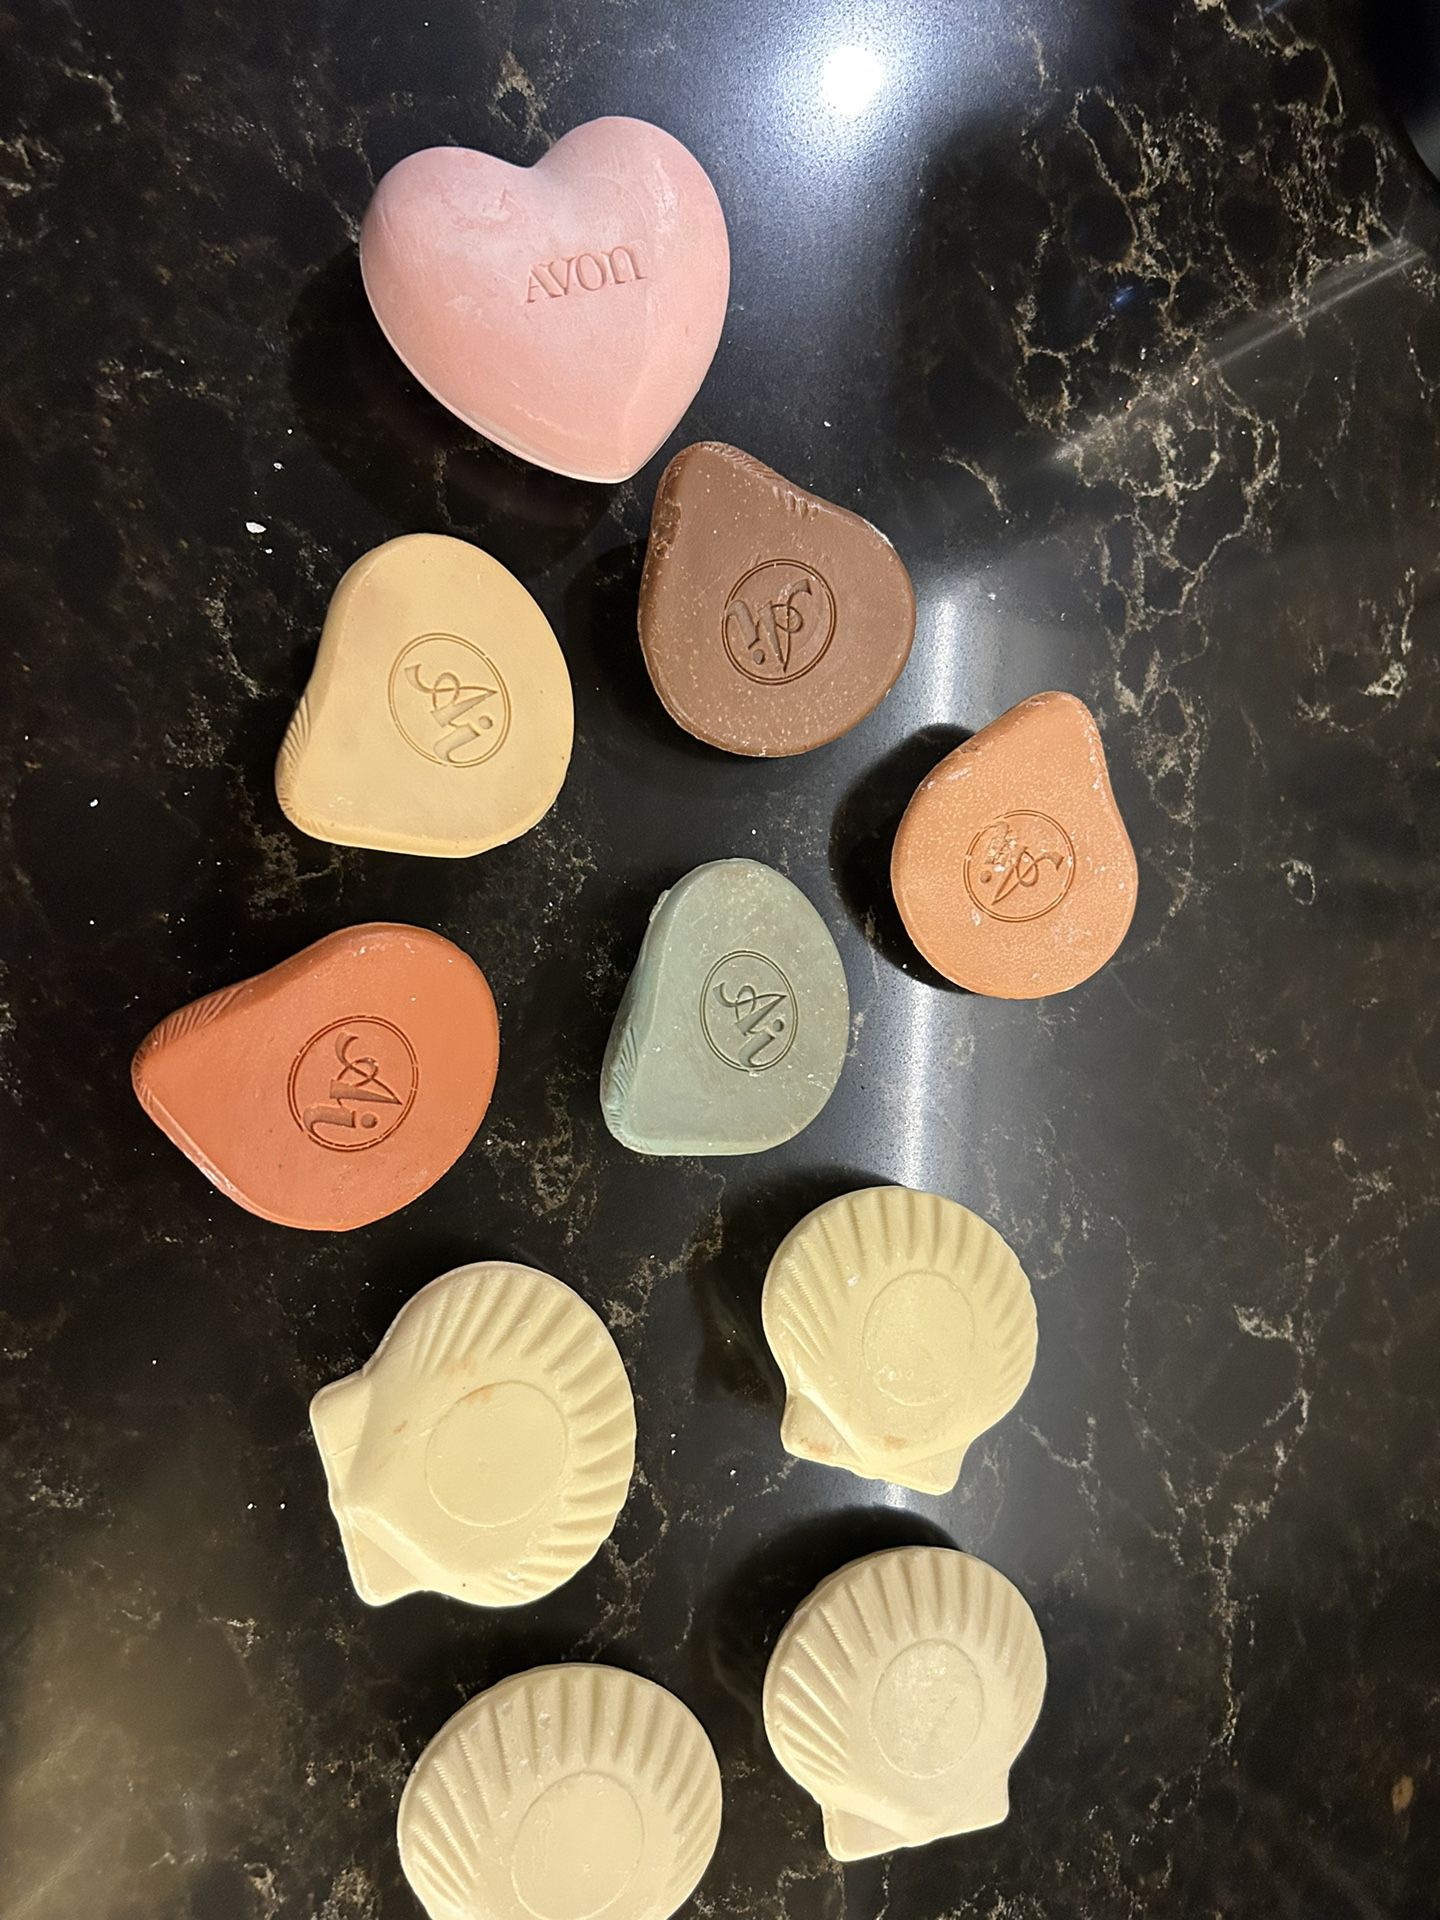 2 Vintage Chanel Bar Soap for Sale in Acampo, CA - OfferUp